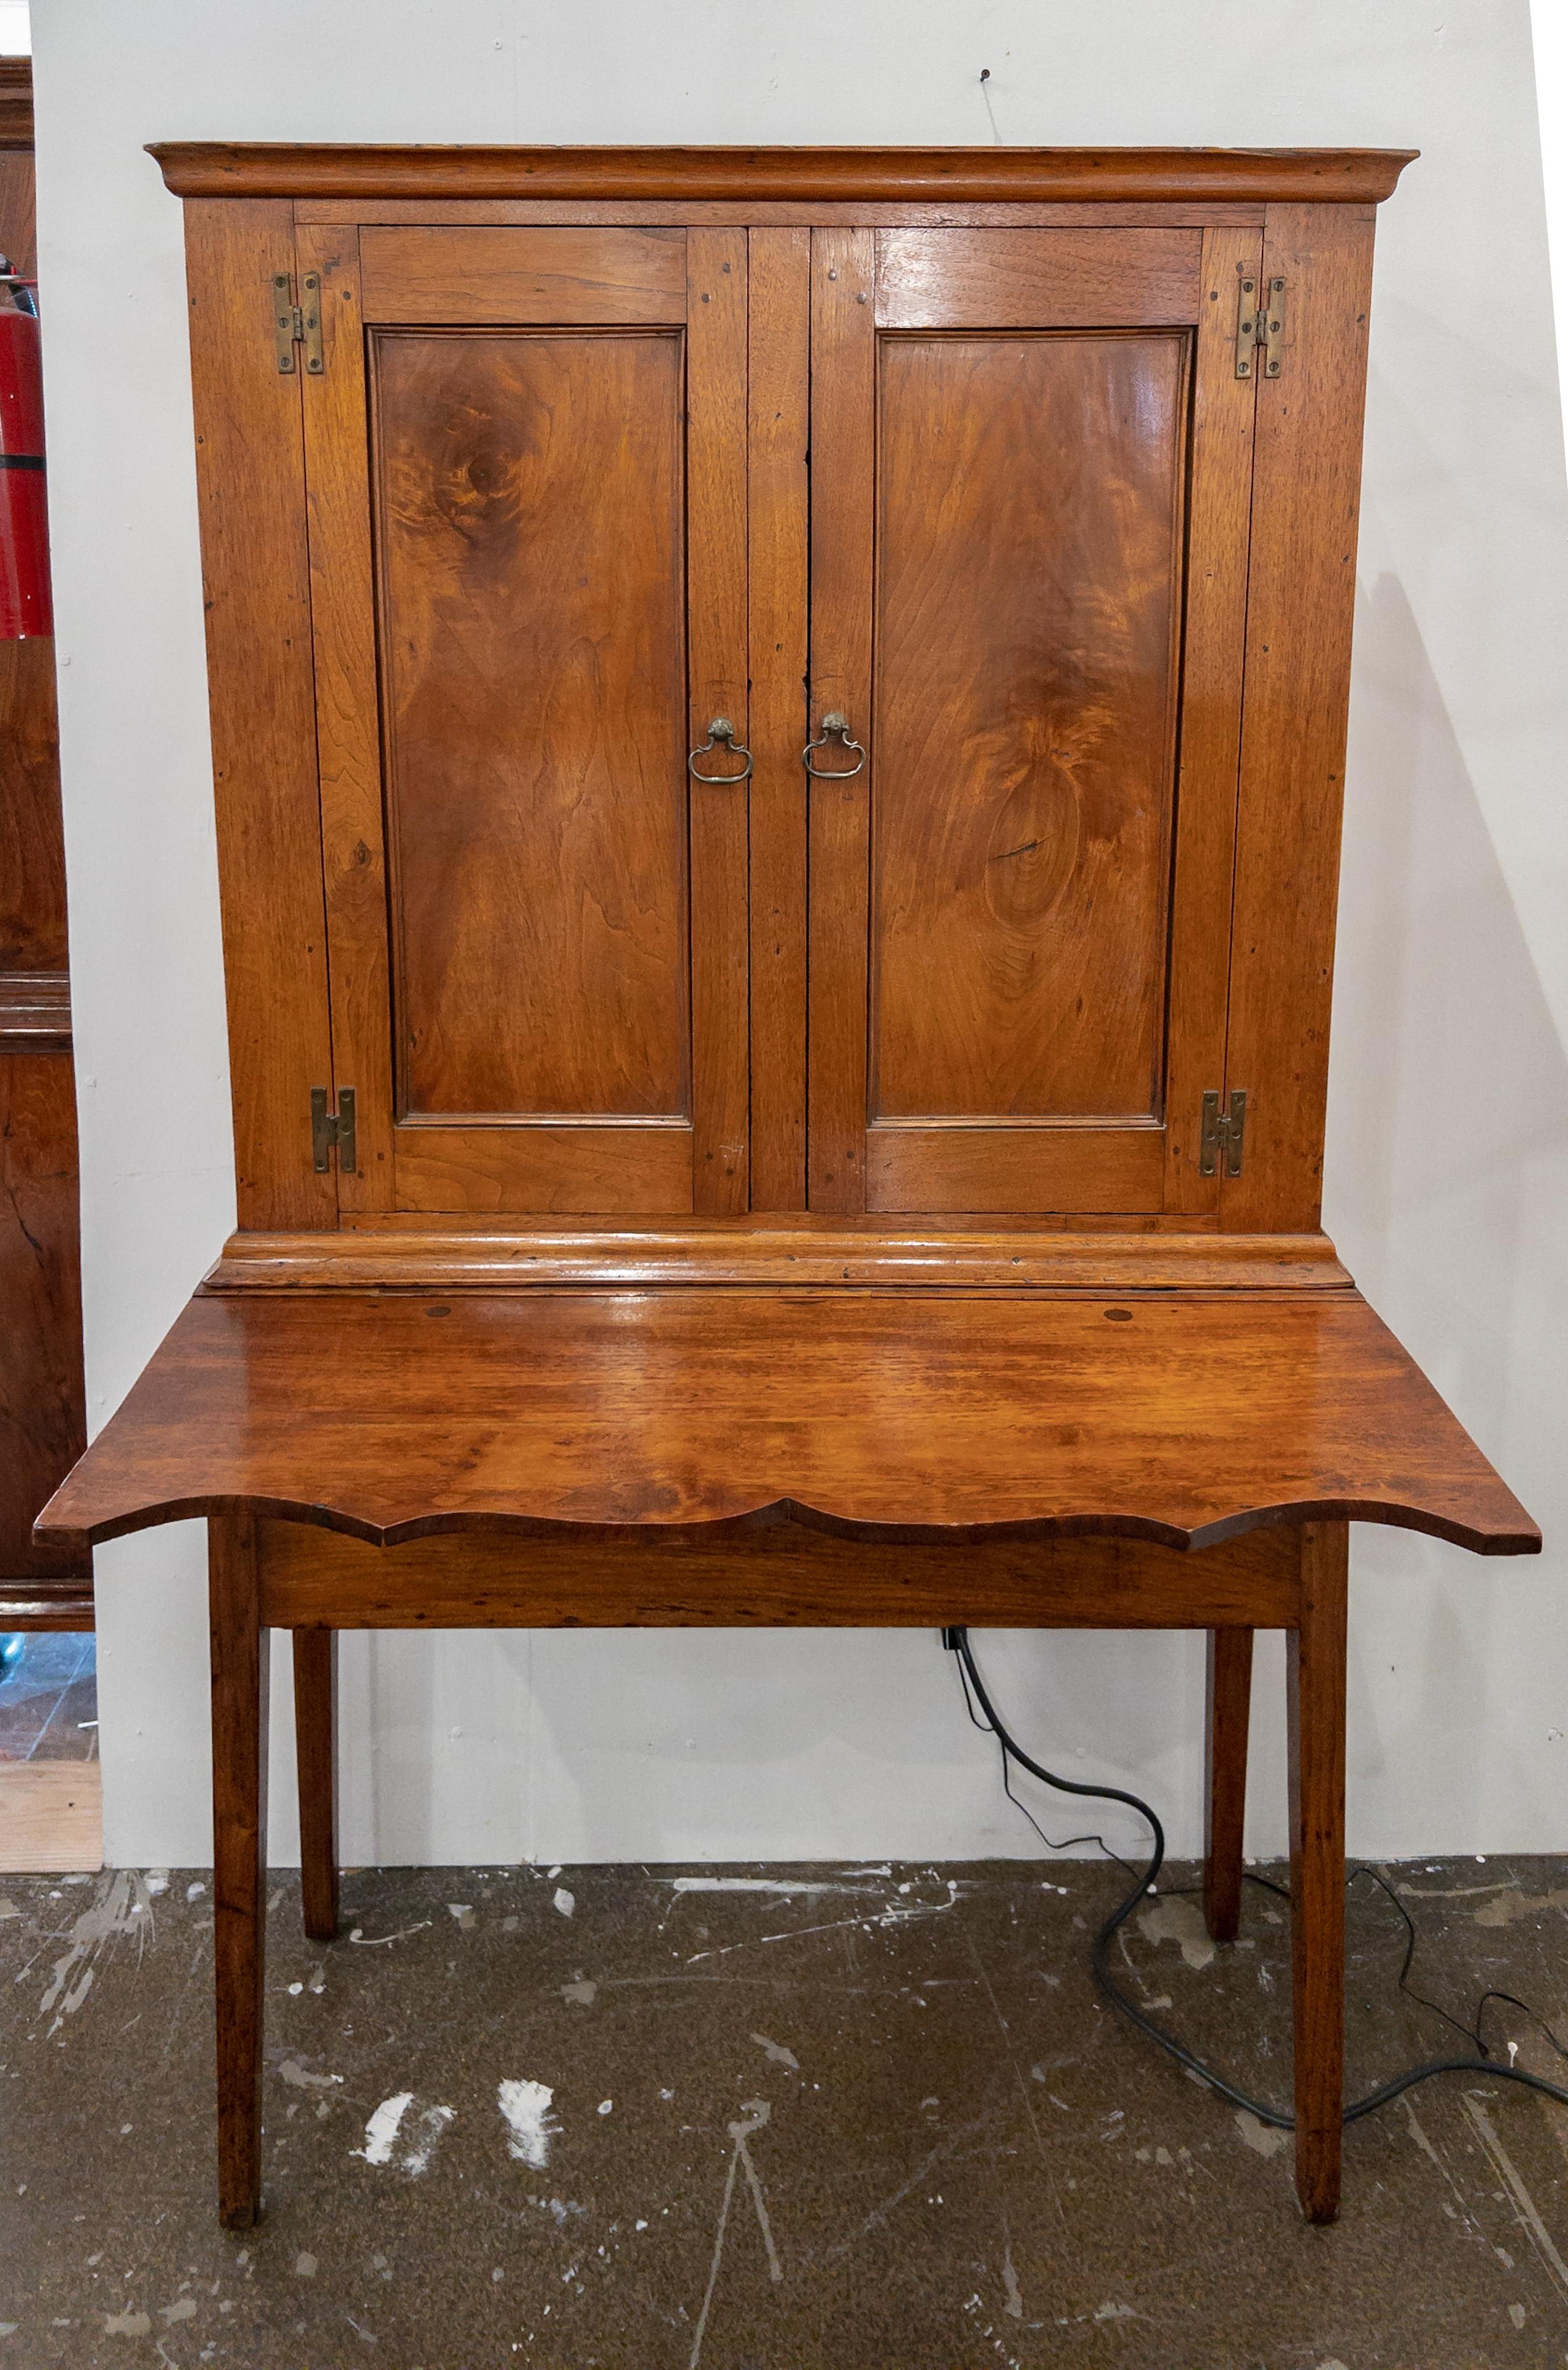 19th Century Shaker Style cabinet on legs with a pull up writing surface. The cabinet has two upper block panel doors and three shelves in the interior. There is also a drawer underneath the writing surface.